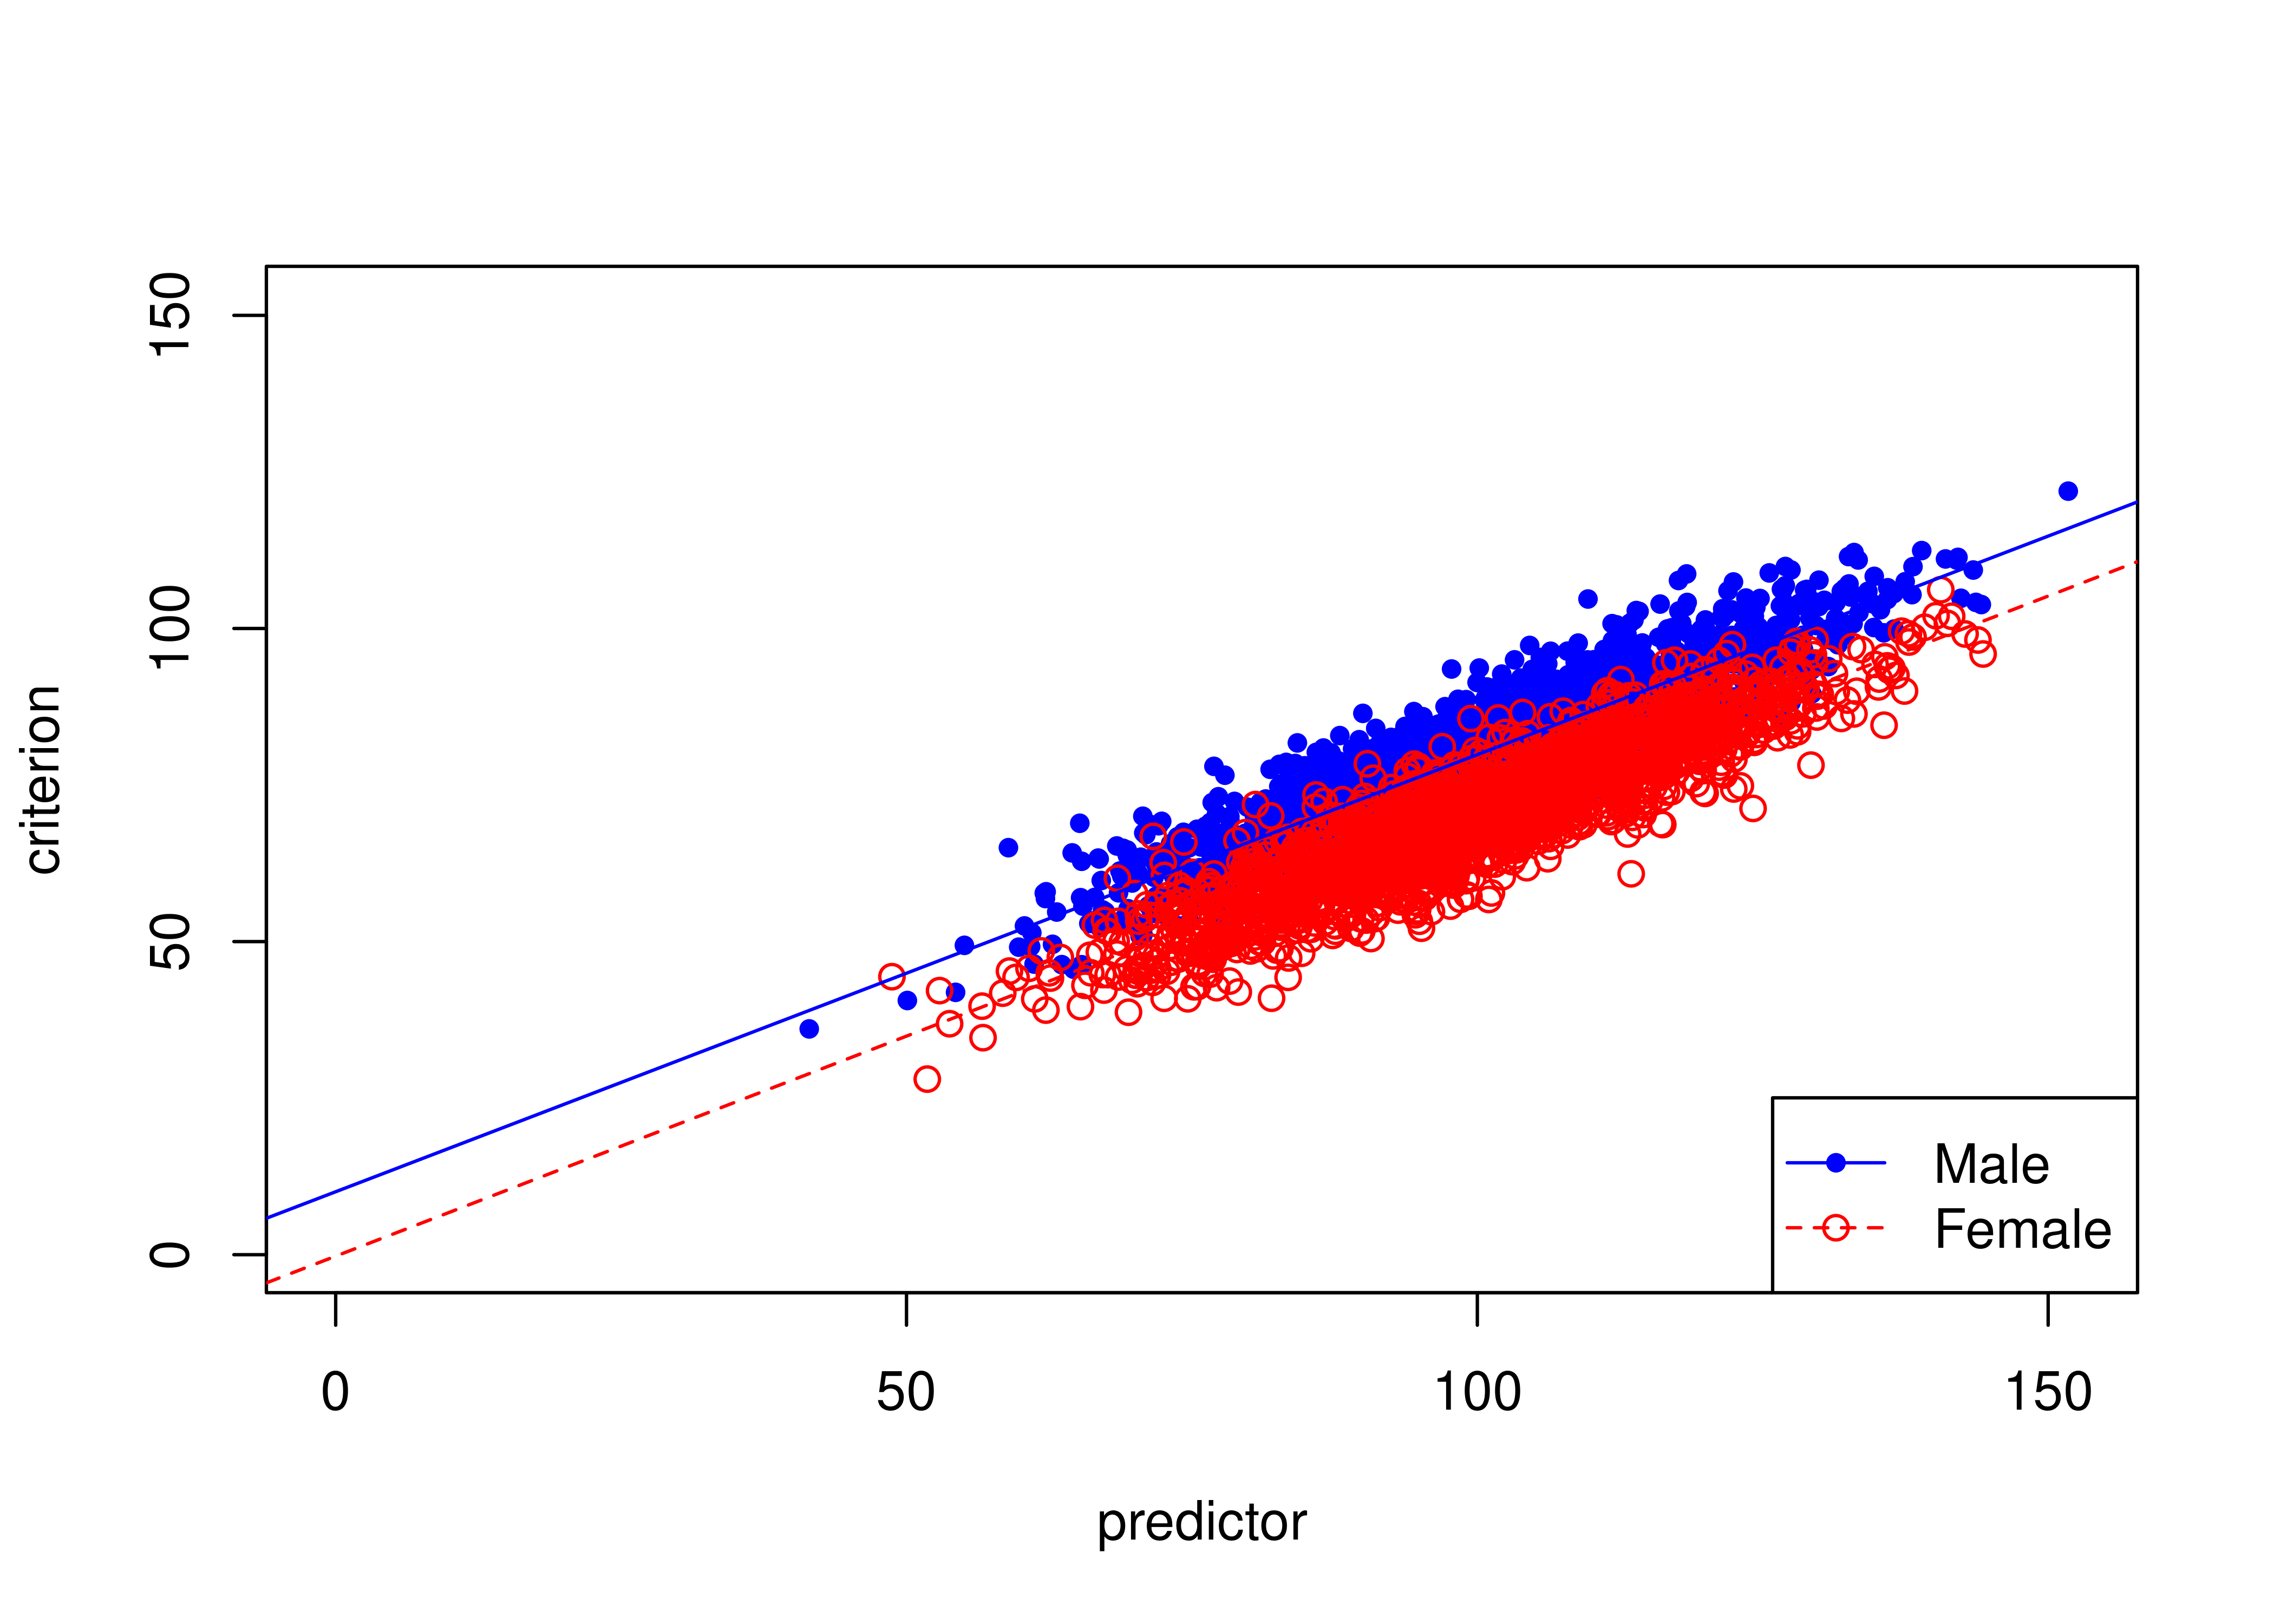 Example of Intercept Bias in Prediction (Different Intercepts Between Males and Females).